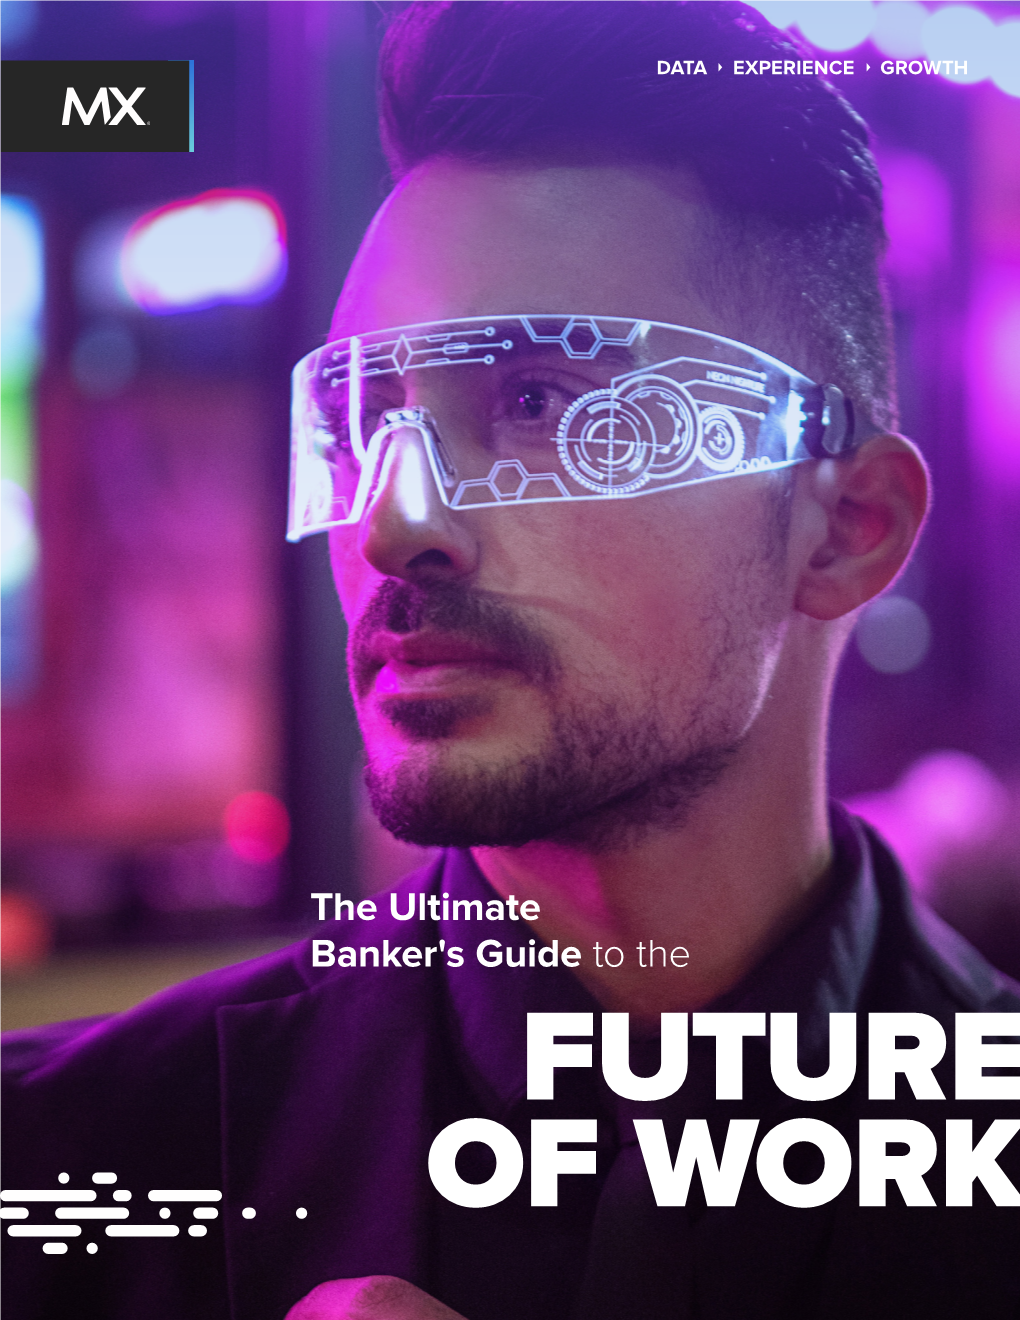 The Ultimate Banker's Guide to the FUTURE of WORK